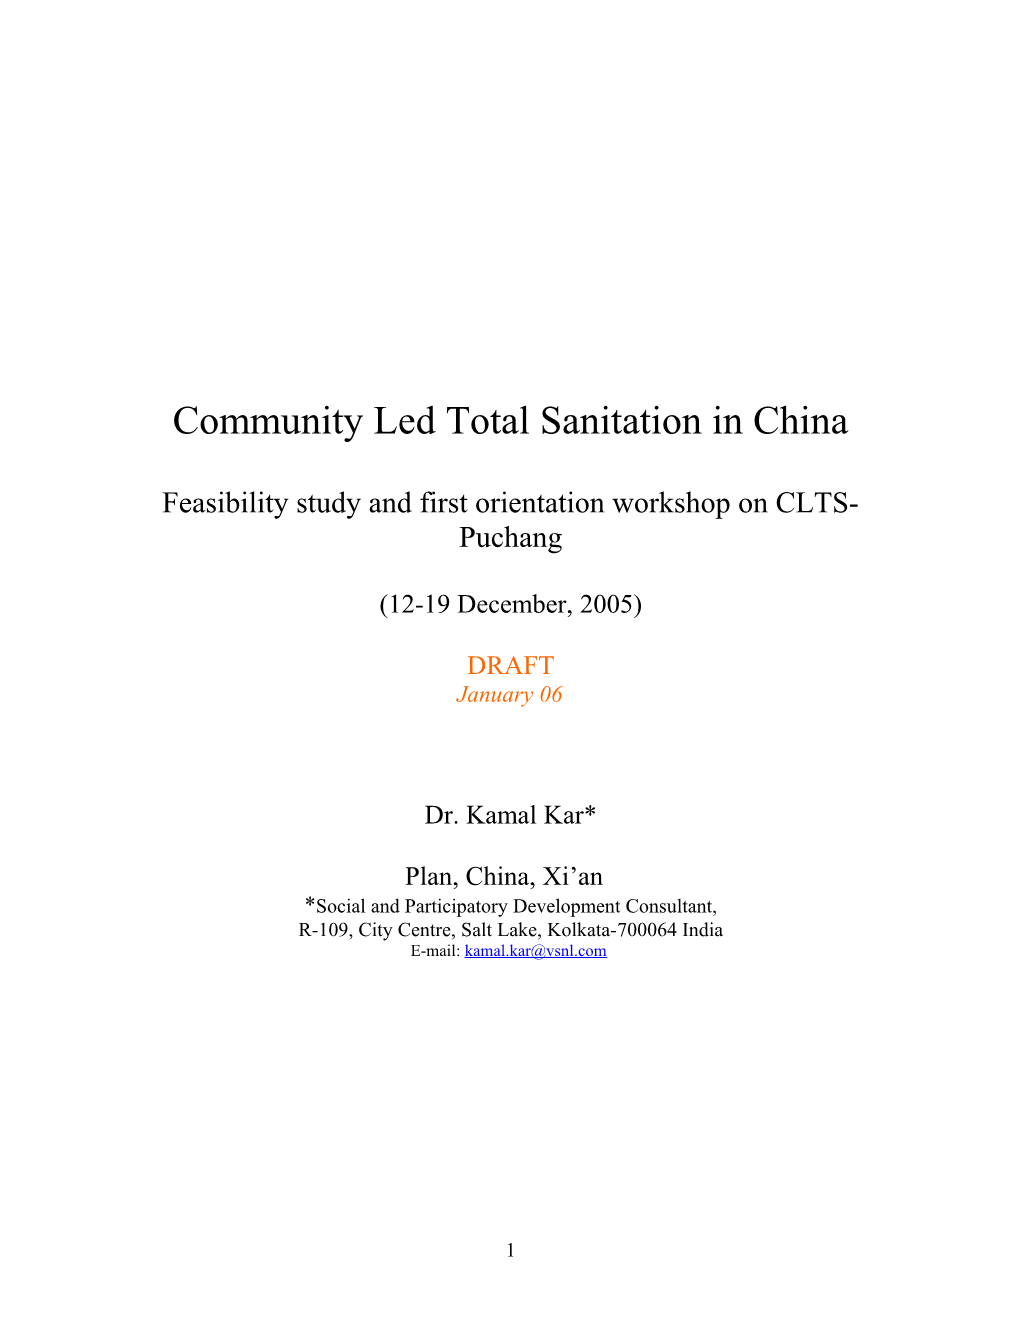 First Orientation Workshop on Community Led Total Sanitation (CLTS) in China